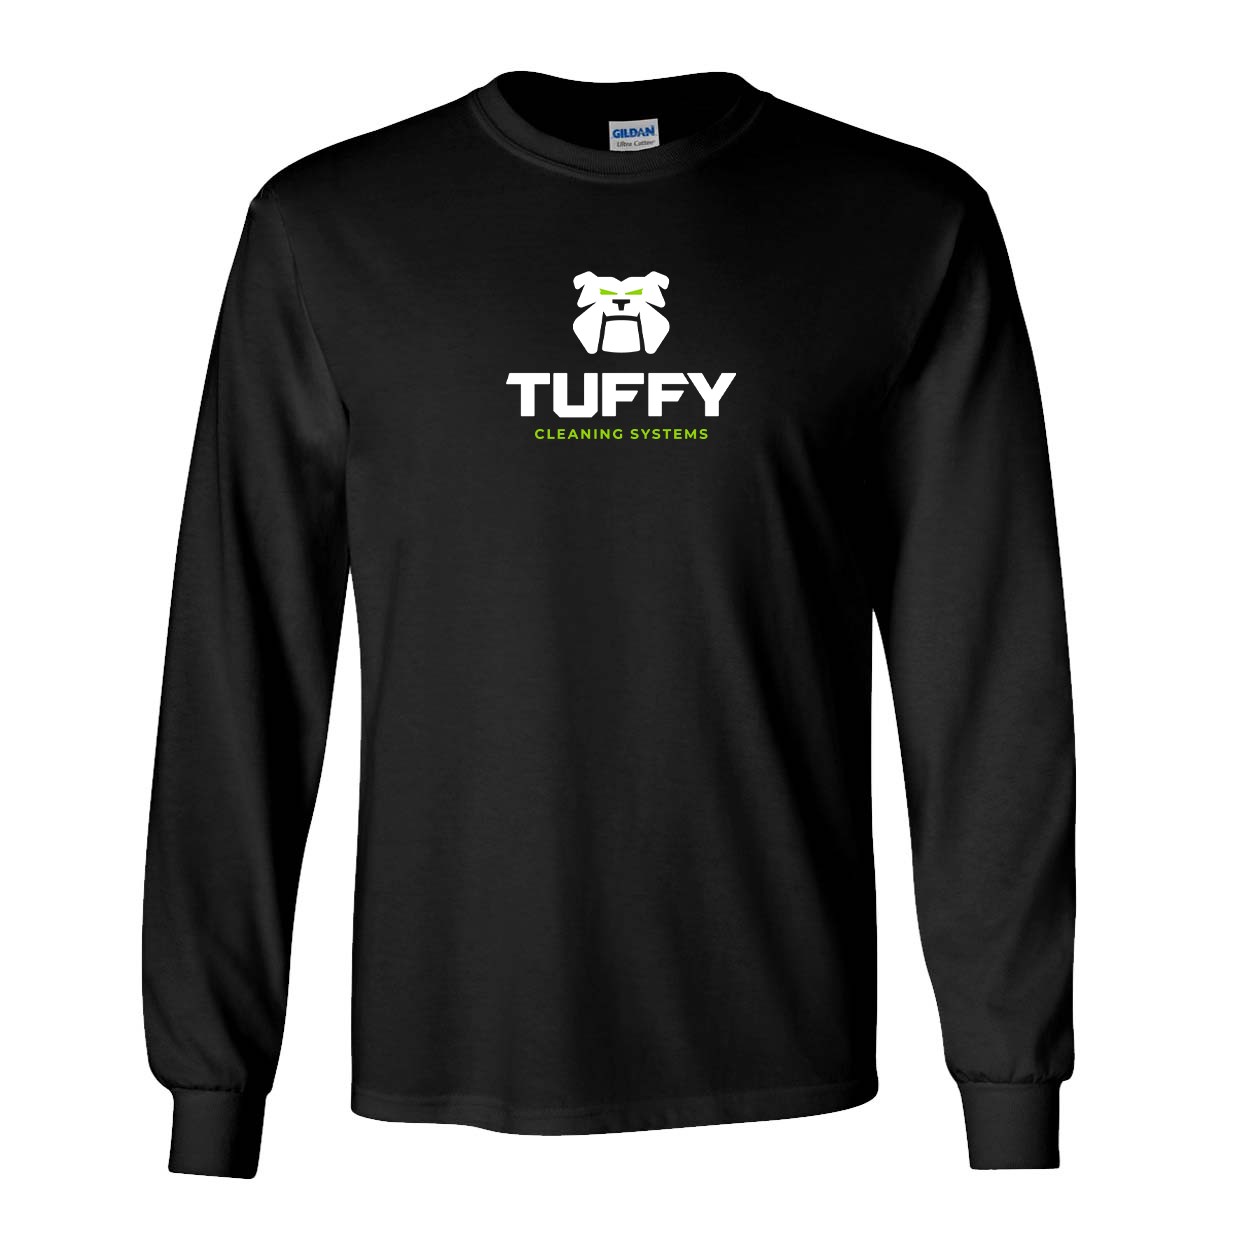 Tuffy Cleaning Systems Reverse Vertical Classic Long Sleeve T-Shirt Black (White Logo)